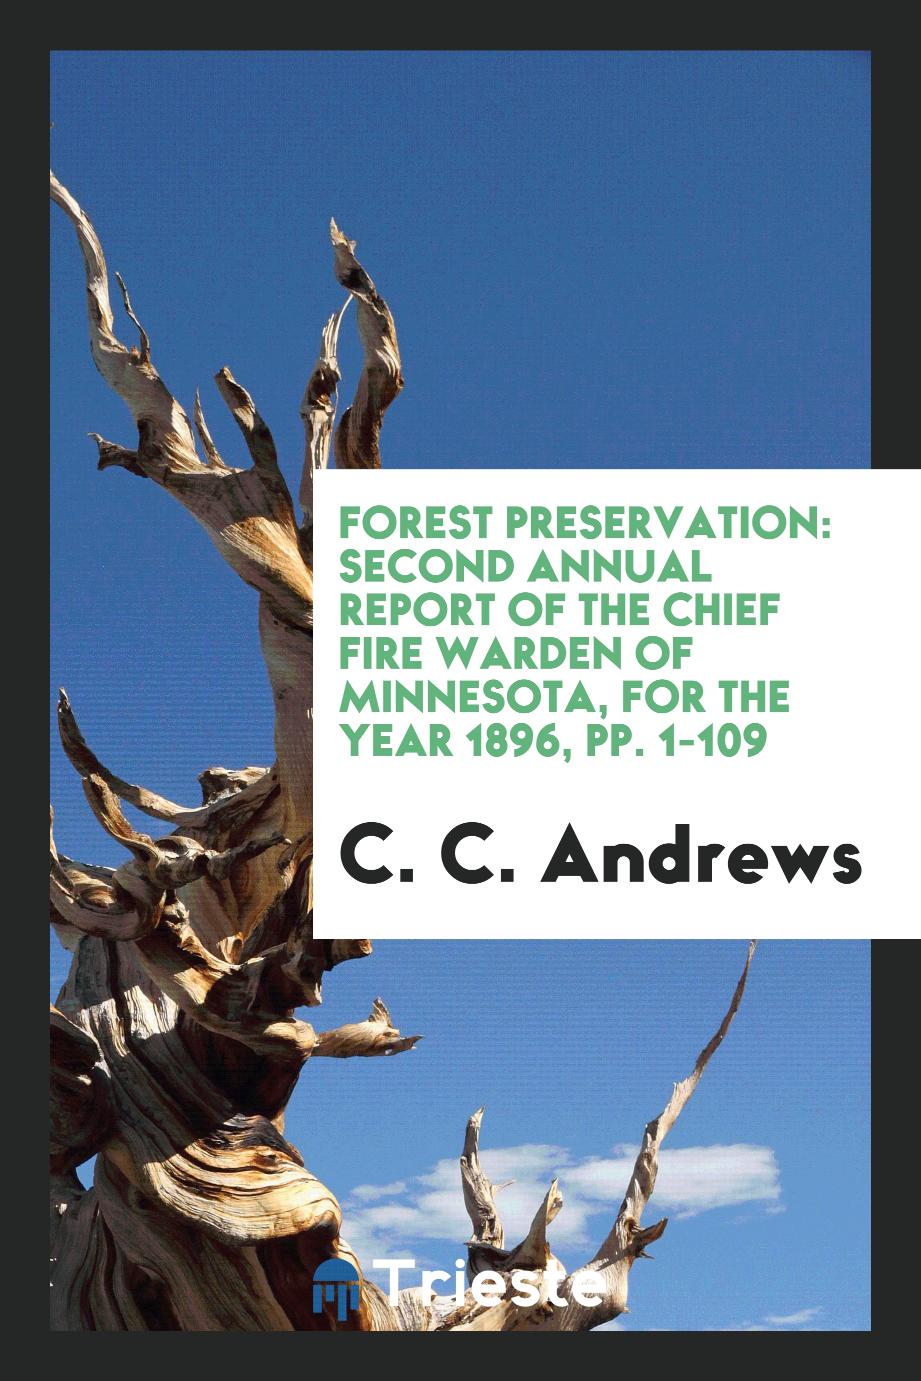 Forest Preservation: Second Annual Report of the Chief Fire Warden of Minnesota, for the Year 1896, pp. 1-109